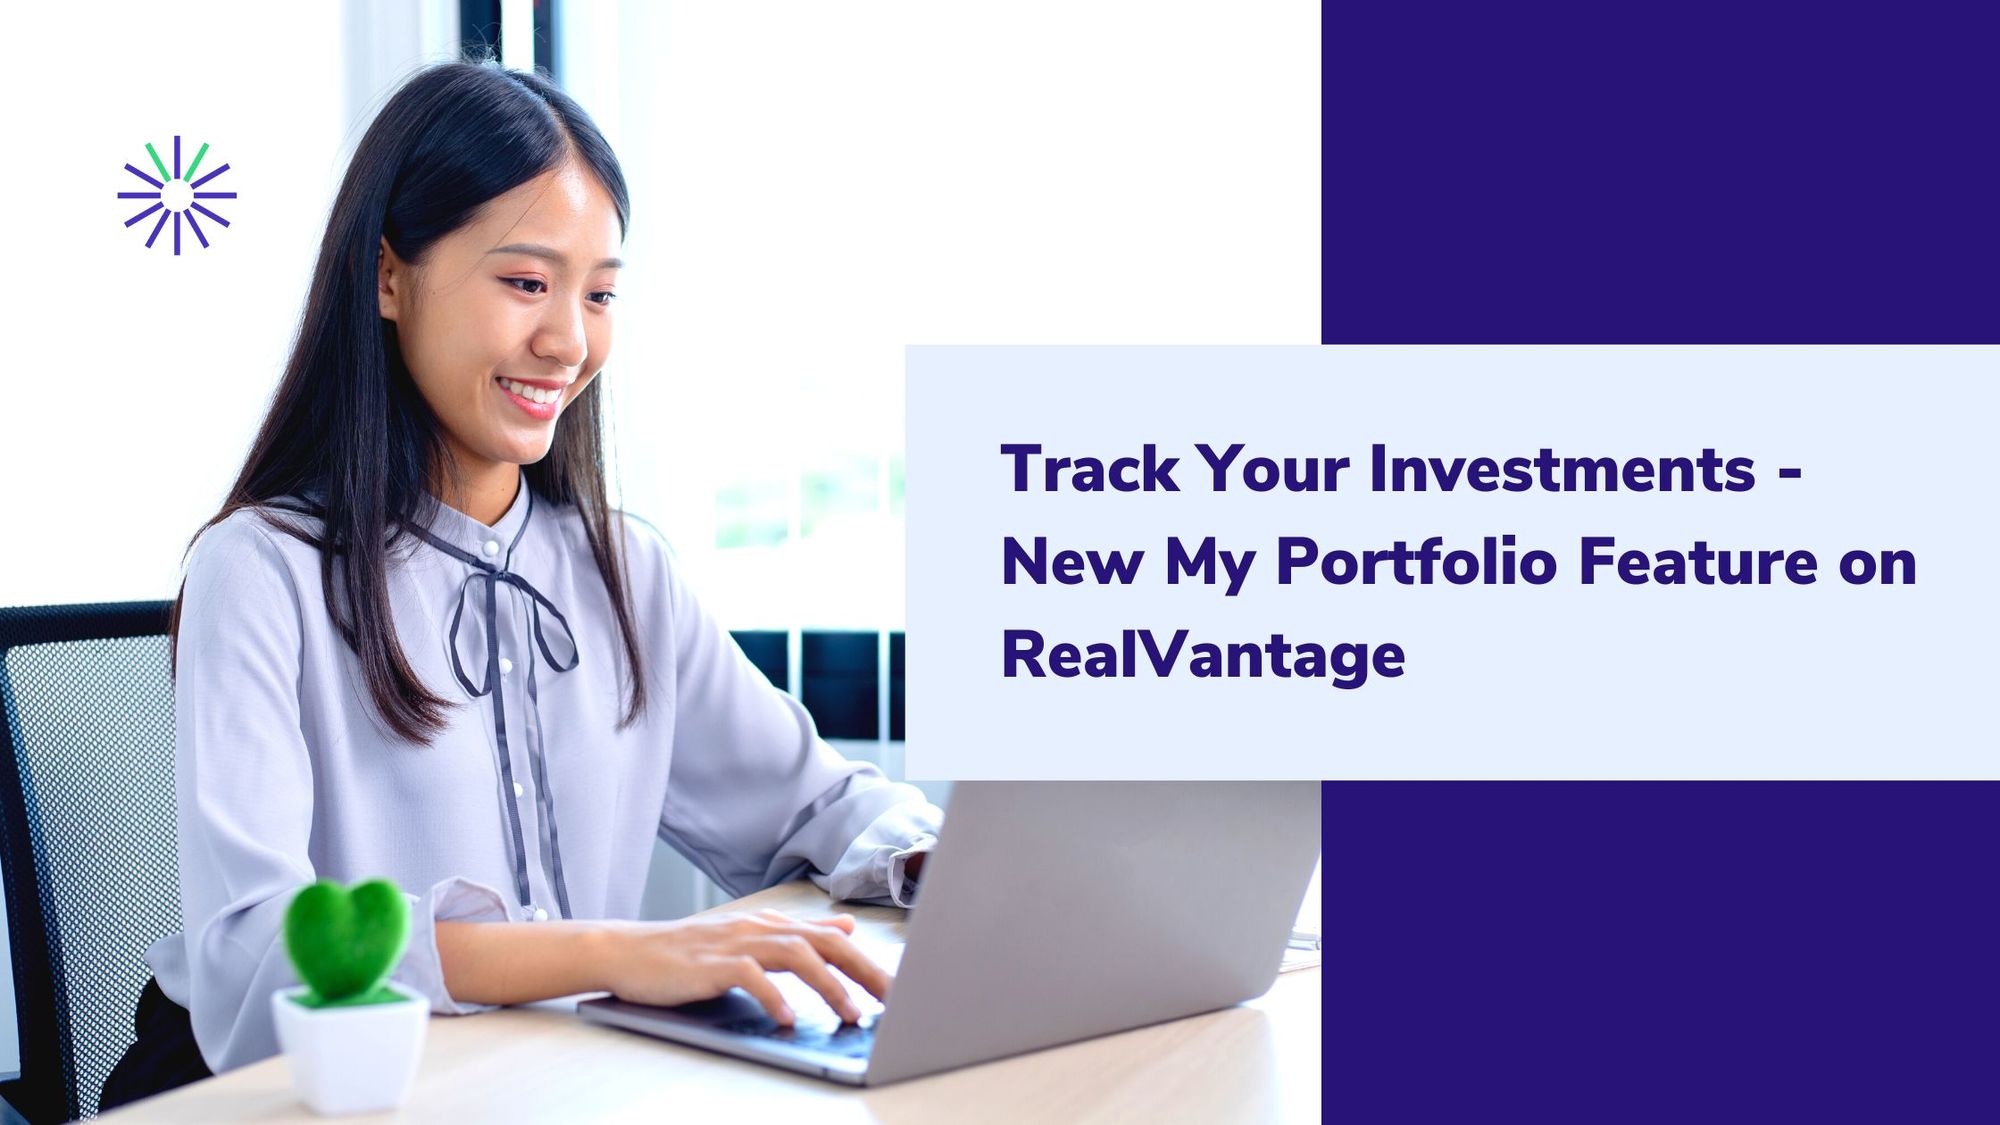 Track Your Investments - New My Portfolio Feature on RealVantage